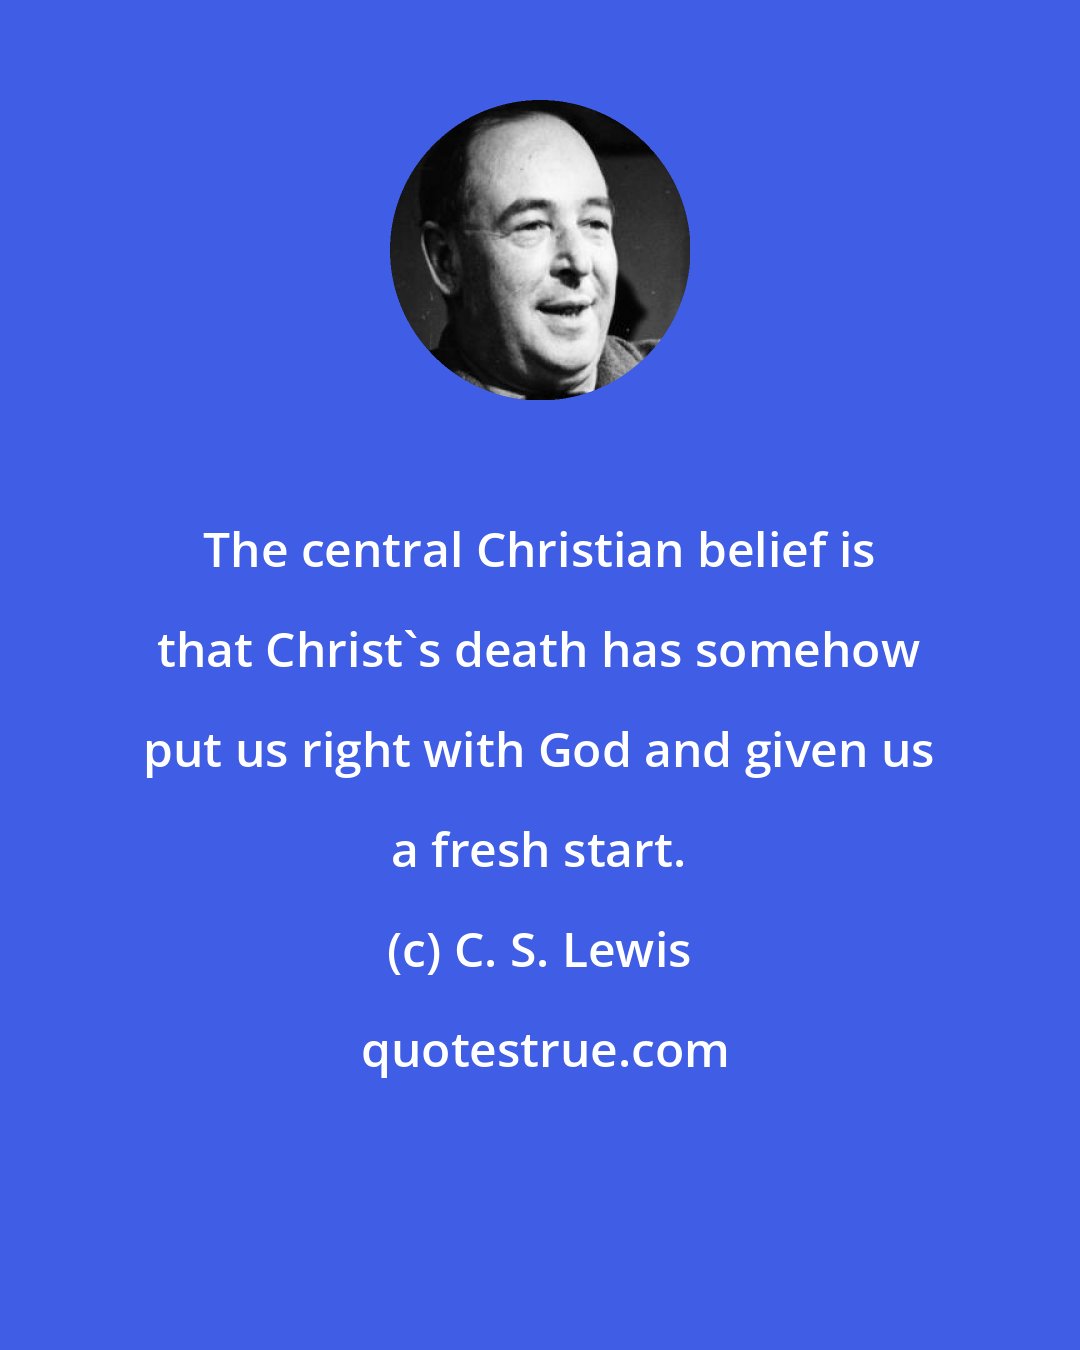 C. S. Lewis: The central Christian belief is that Christ's death has somehow put us right with God and given us a fresh start.